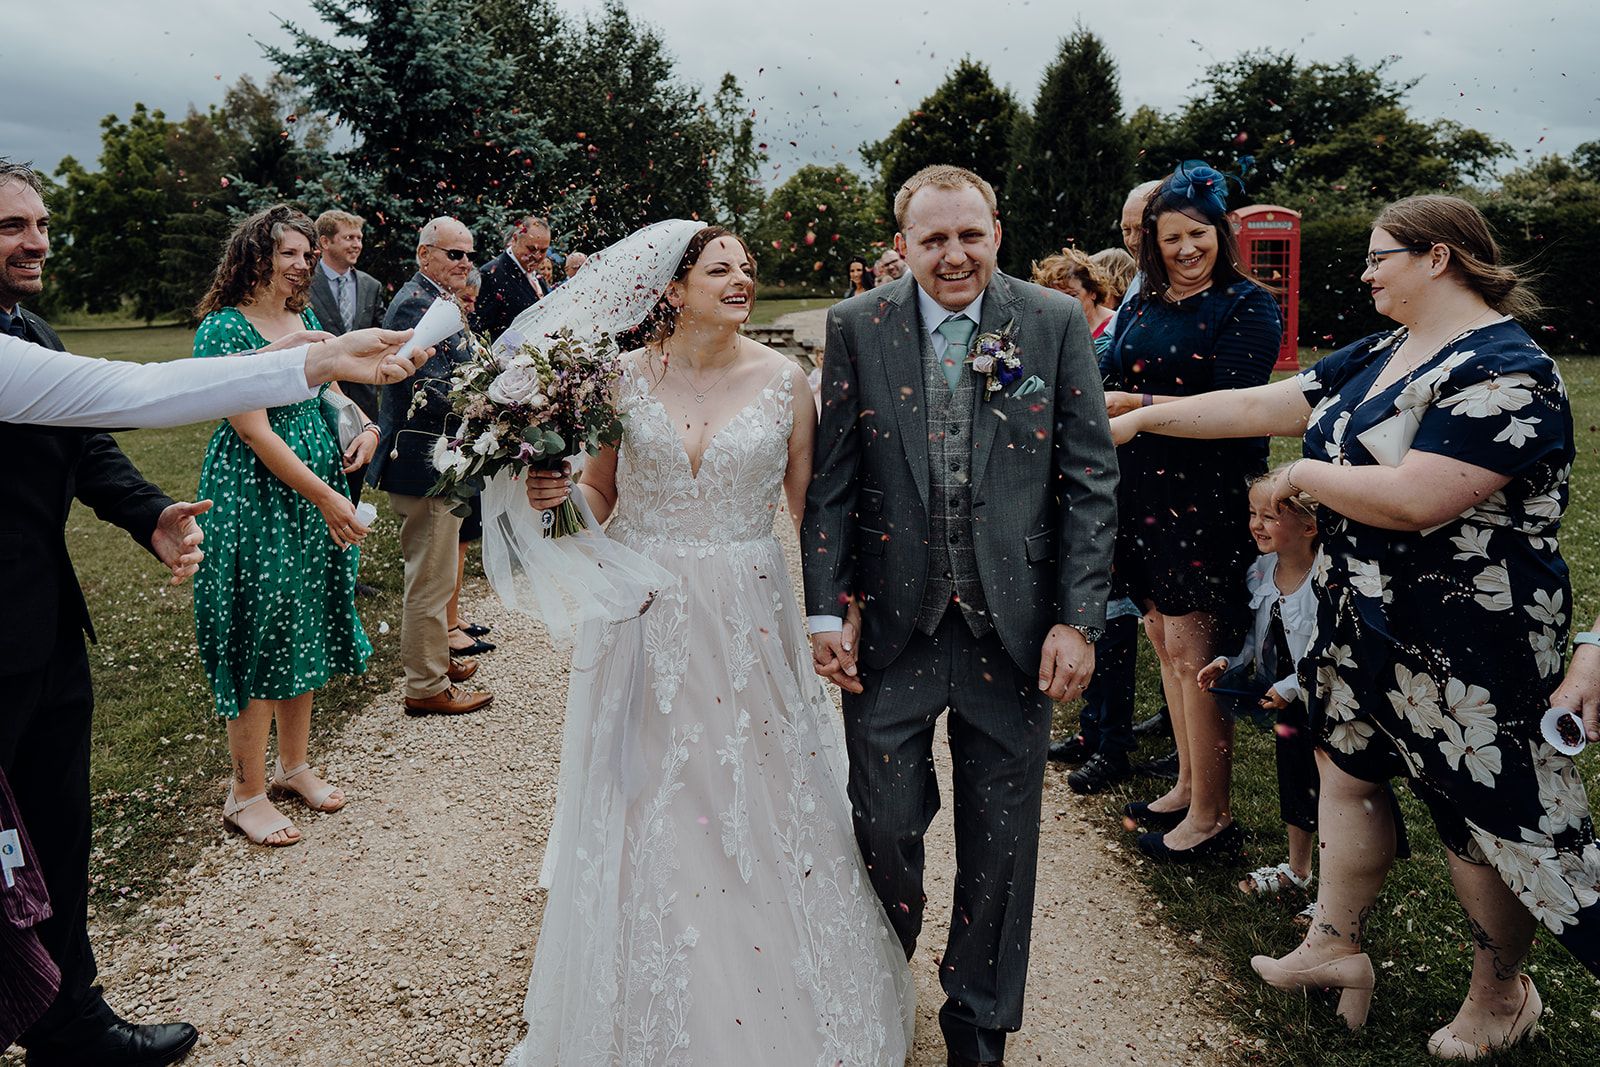 Georgie and James laughing whilst their guests throw confetti. Photo thanks to Sam and Steve Photography.